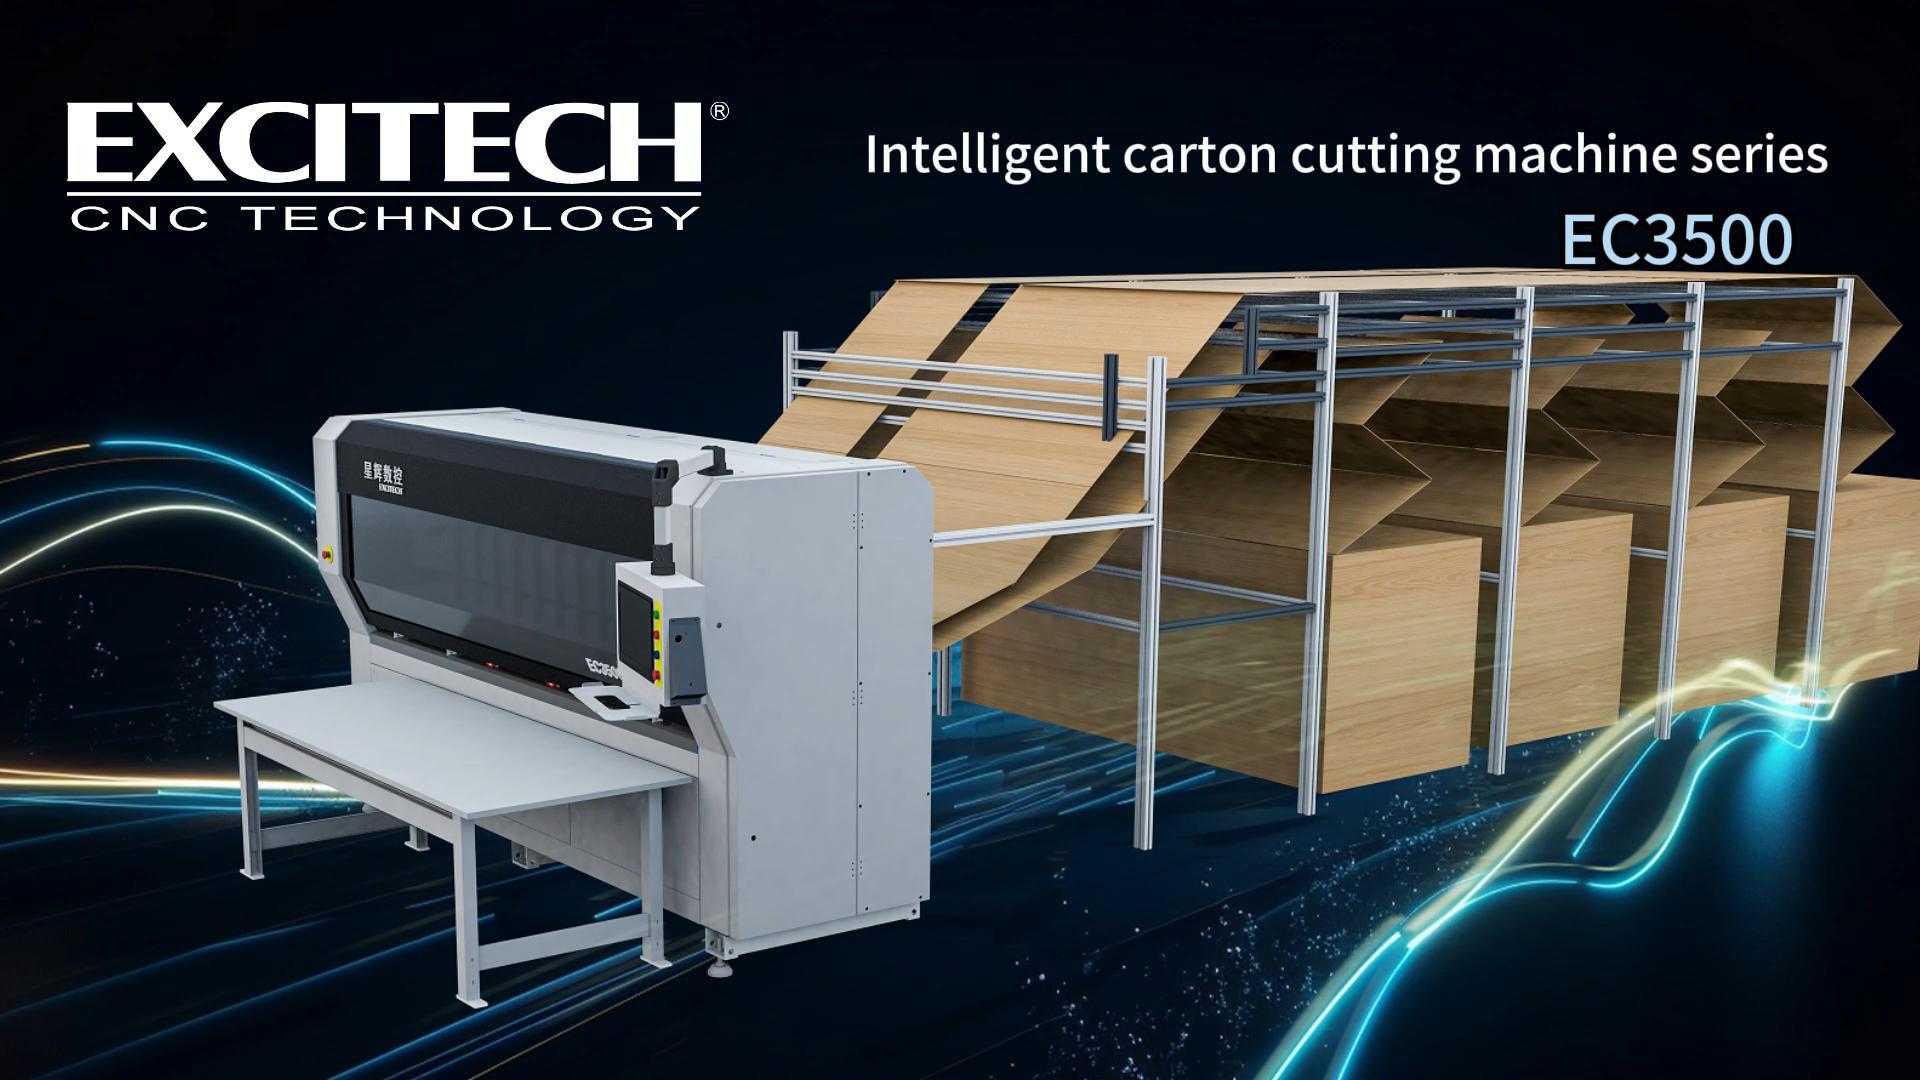 Excitech carton cutting machine -EC3500 series eight-paper library multi-station paper cutter